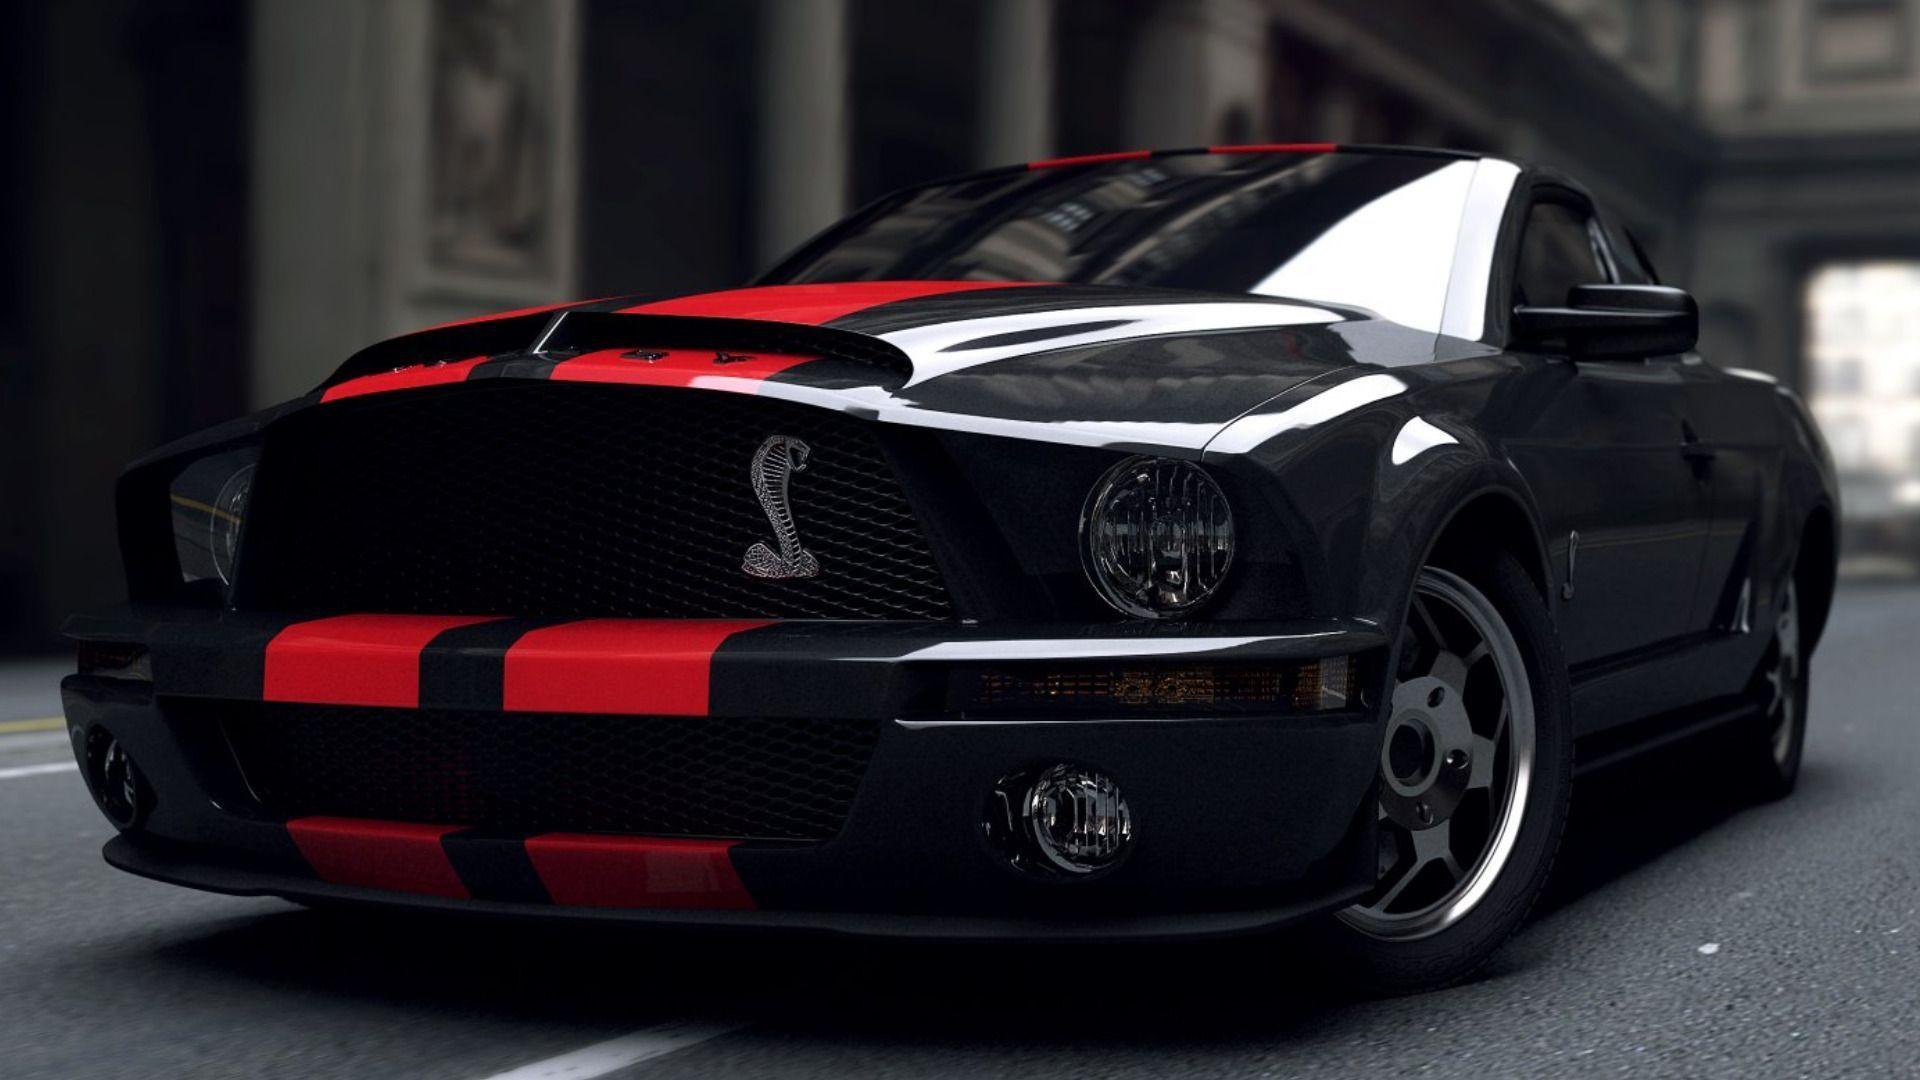 Black Ford Mustang Wallpapers Top Free Black Ford Mustang Backgrounds Wallpaperaccess